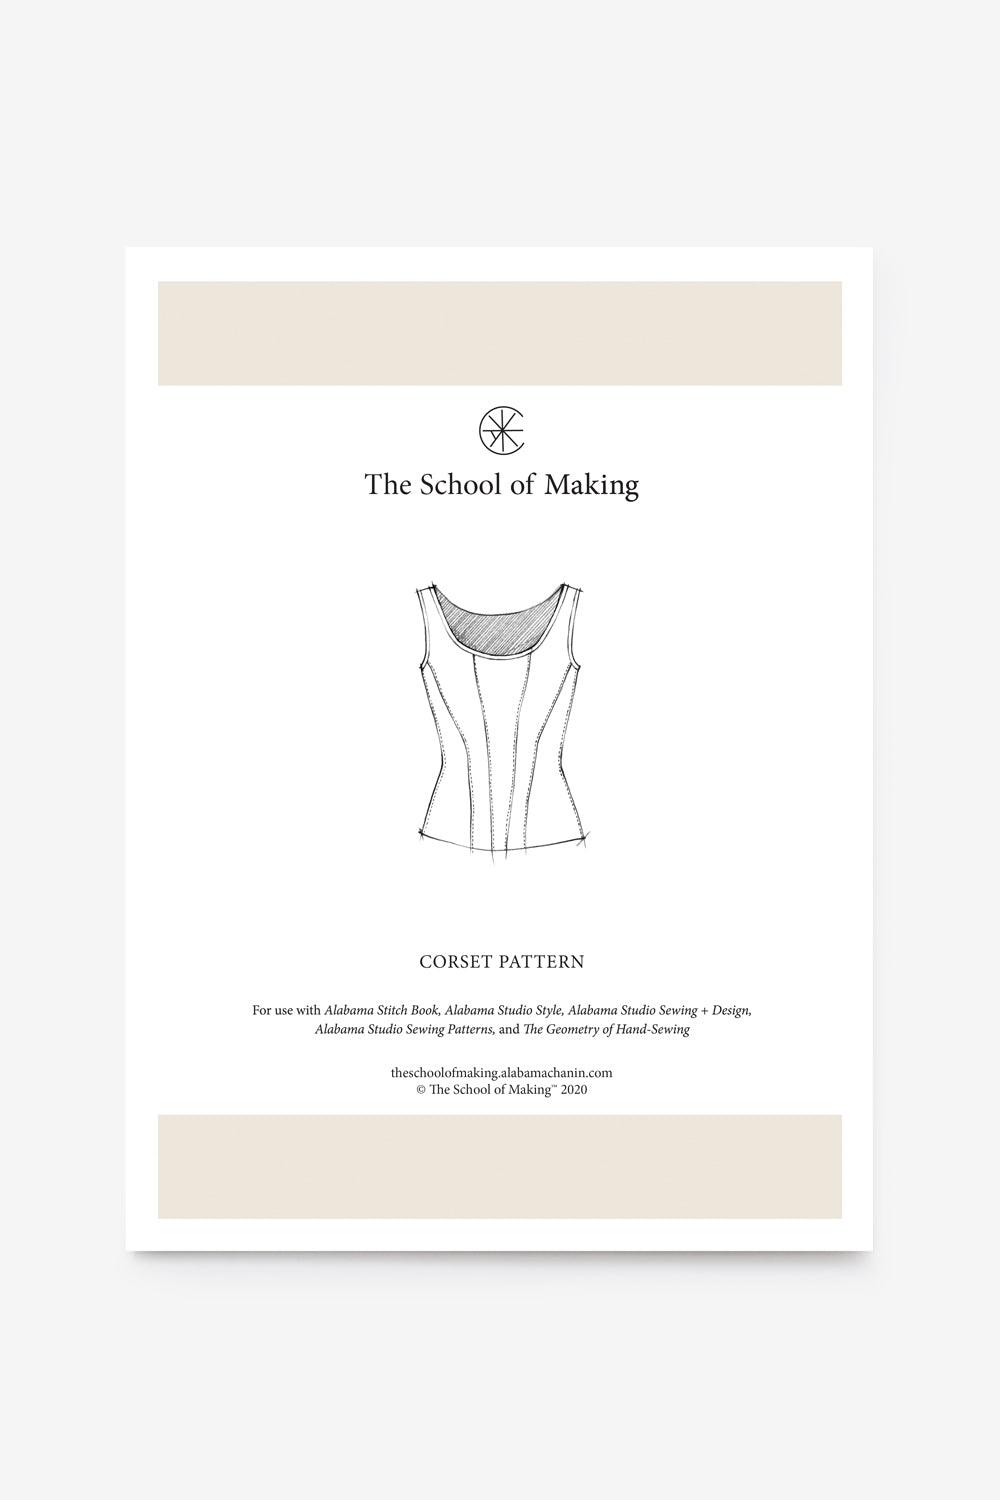 https://cdn.shopify.com/s/files/1/0411/9864/9508/products/the-school-of-making--the-corset-pattern--maker-supplies--sewing-pattern-envelope.jpg?v=1645459200